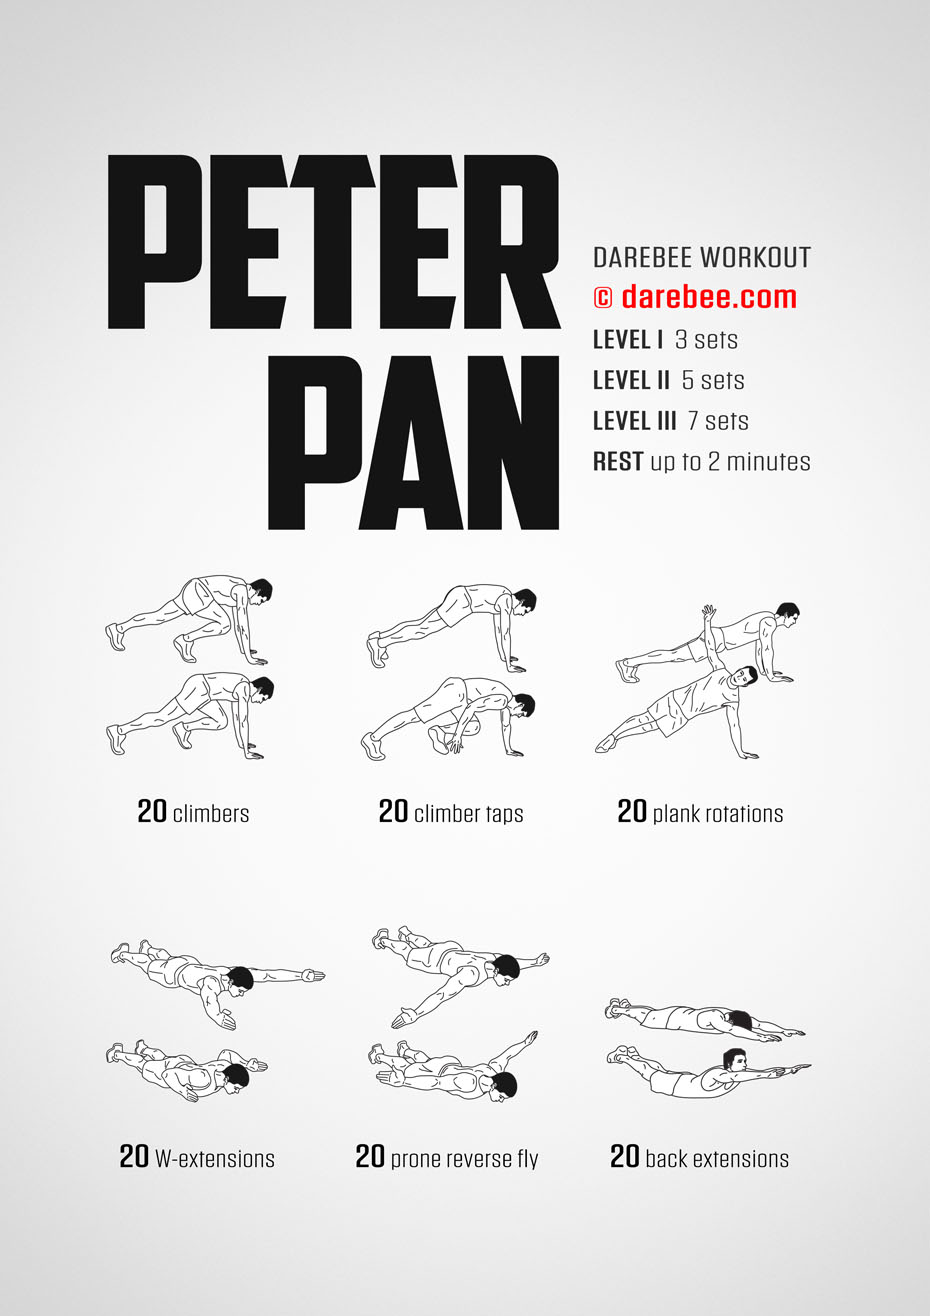 Peter Pan is a Darebee home-fitness workout designed to challenge your entire body.